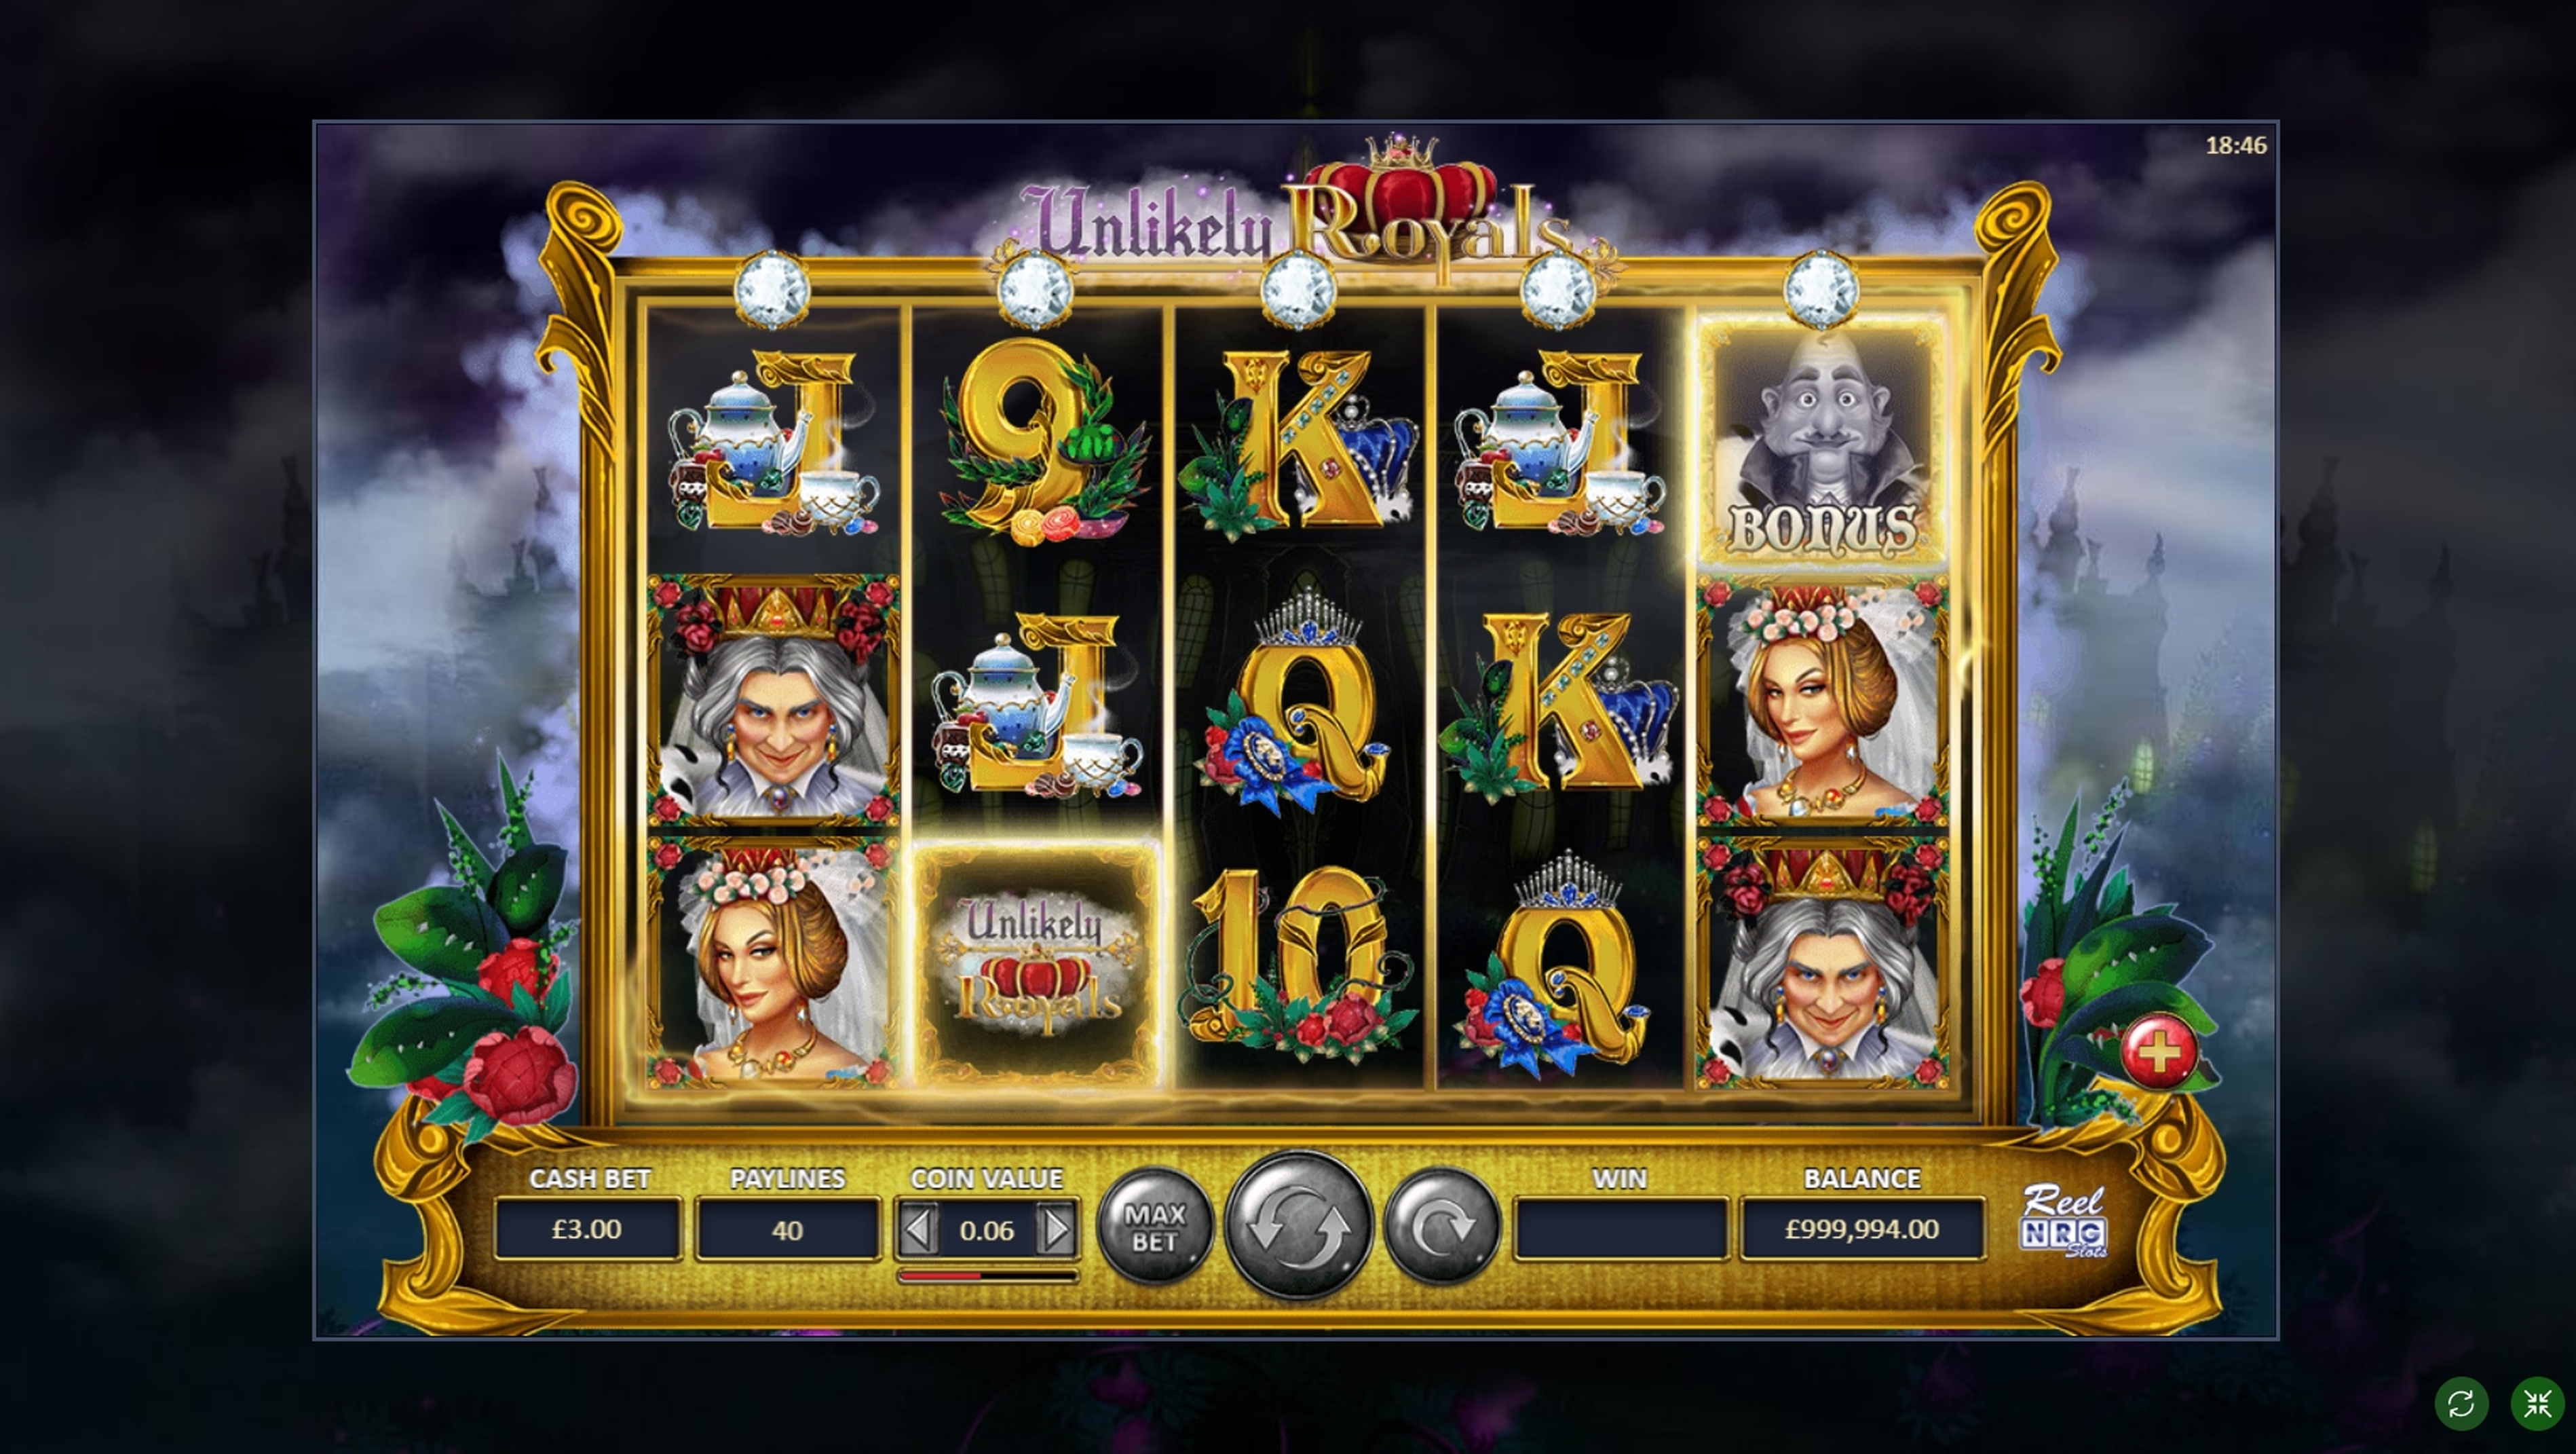 Win Money in Unlikely Royals Free Slot Game by ReelNRG Gaming